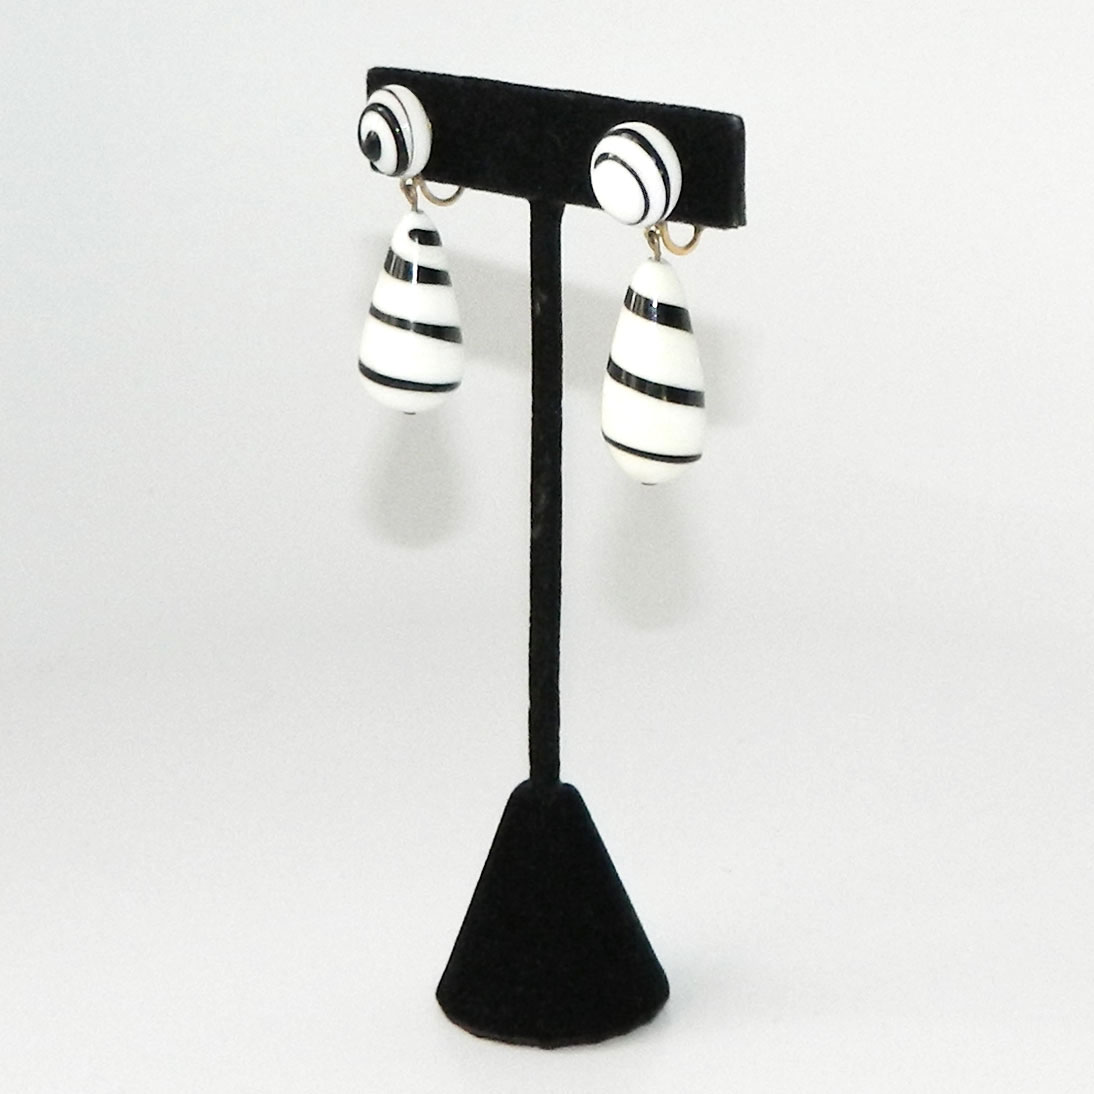 Vogue black and white drop earrings